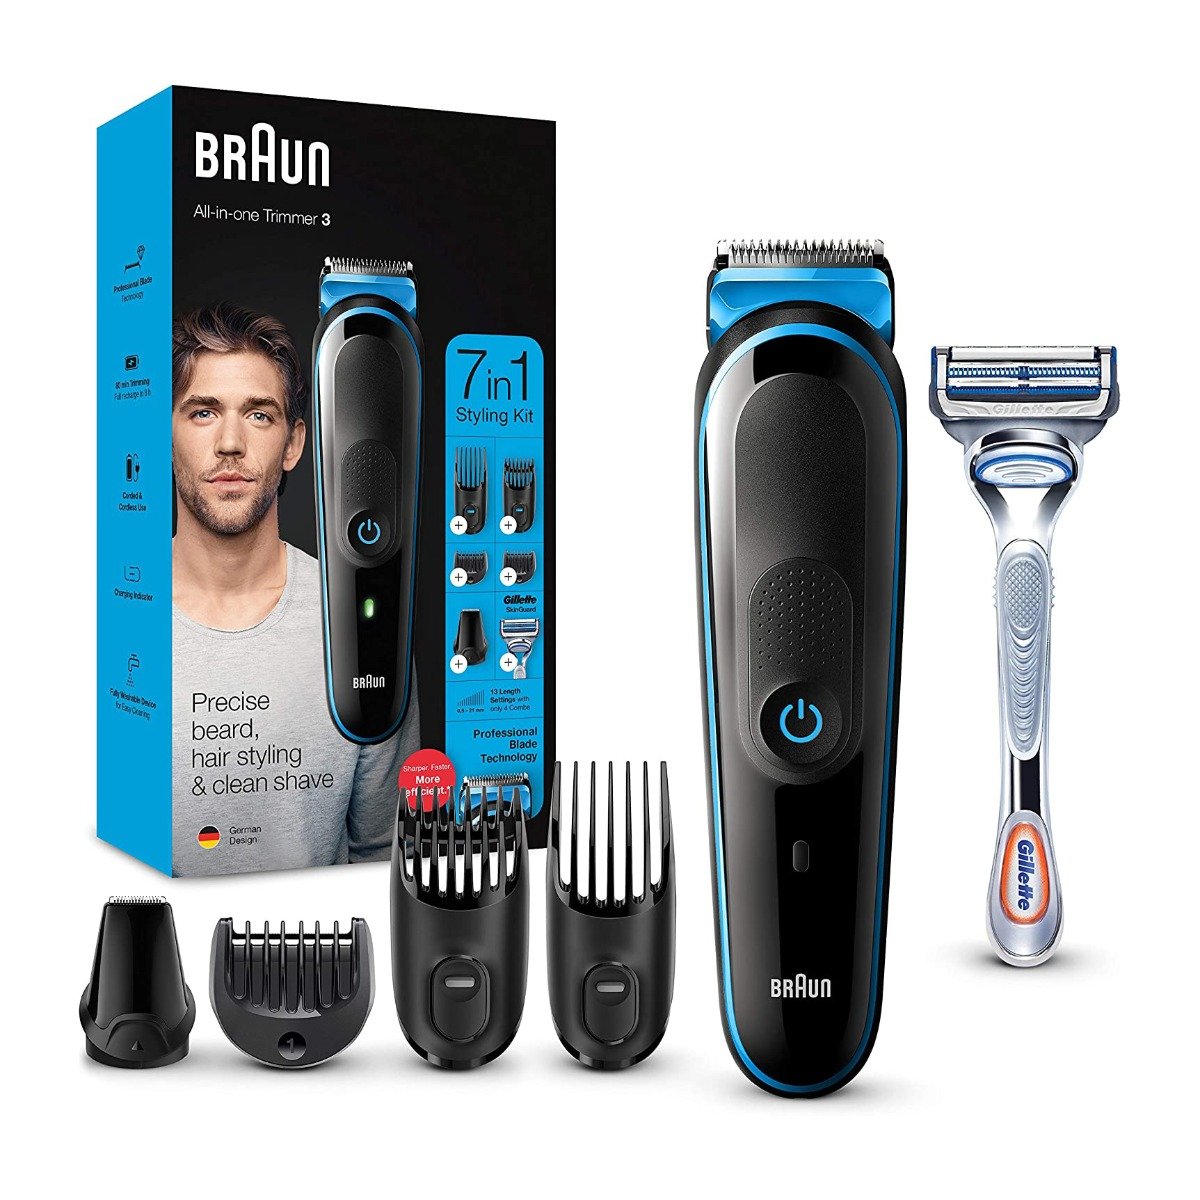 Braun All-In-One Trimmer (3) 7 In 1 Styling Kit - MGK3242 - Bloom Pharmacy